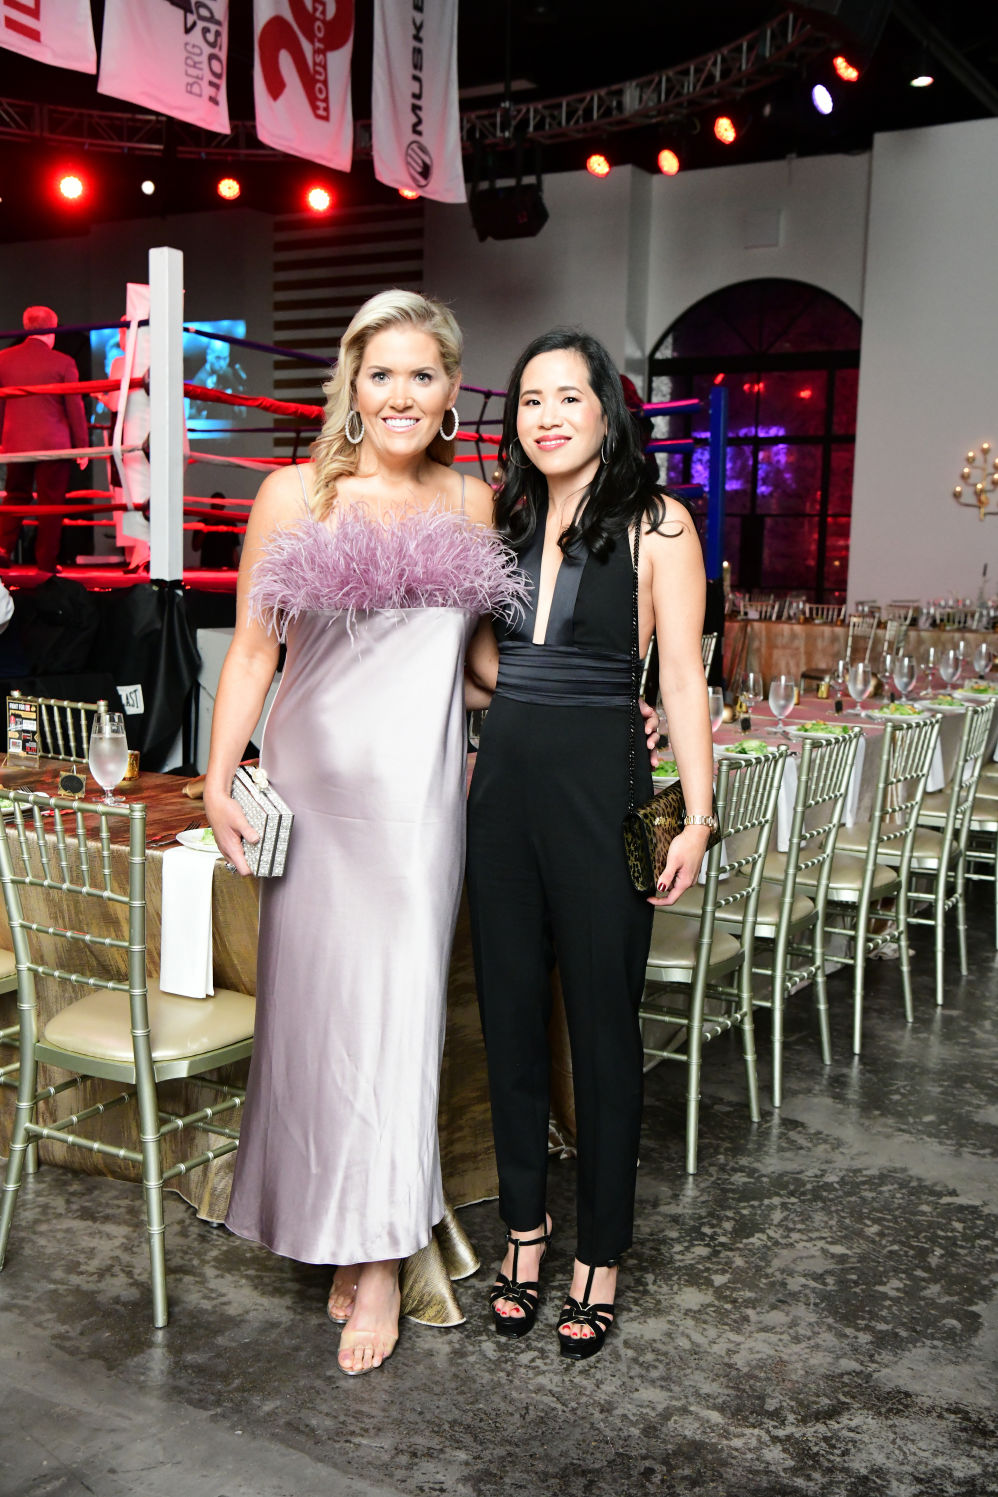 Throw Down Society Hosts Third Annual “Knockout” Soirée to Benefit Hope Rising and Houston20 Houstonia Magazine